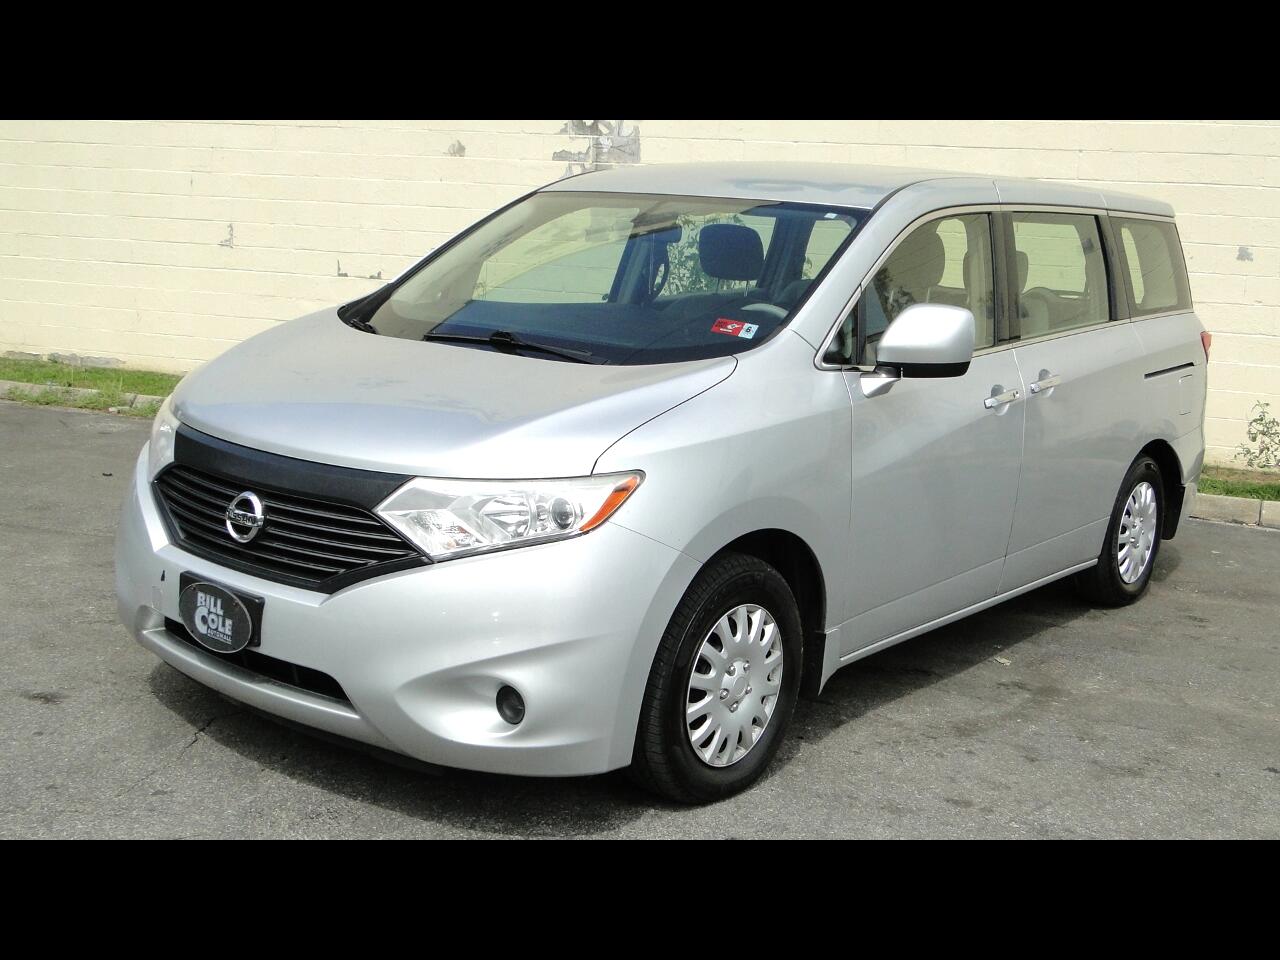 Used 2013 Nissan Quest 4dr S for Sale in Lexington KY 40505 Prestige Auto Gallery 1 2016 Nissan Quest Tire Size P225 65r16 S Sv